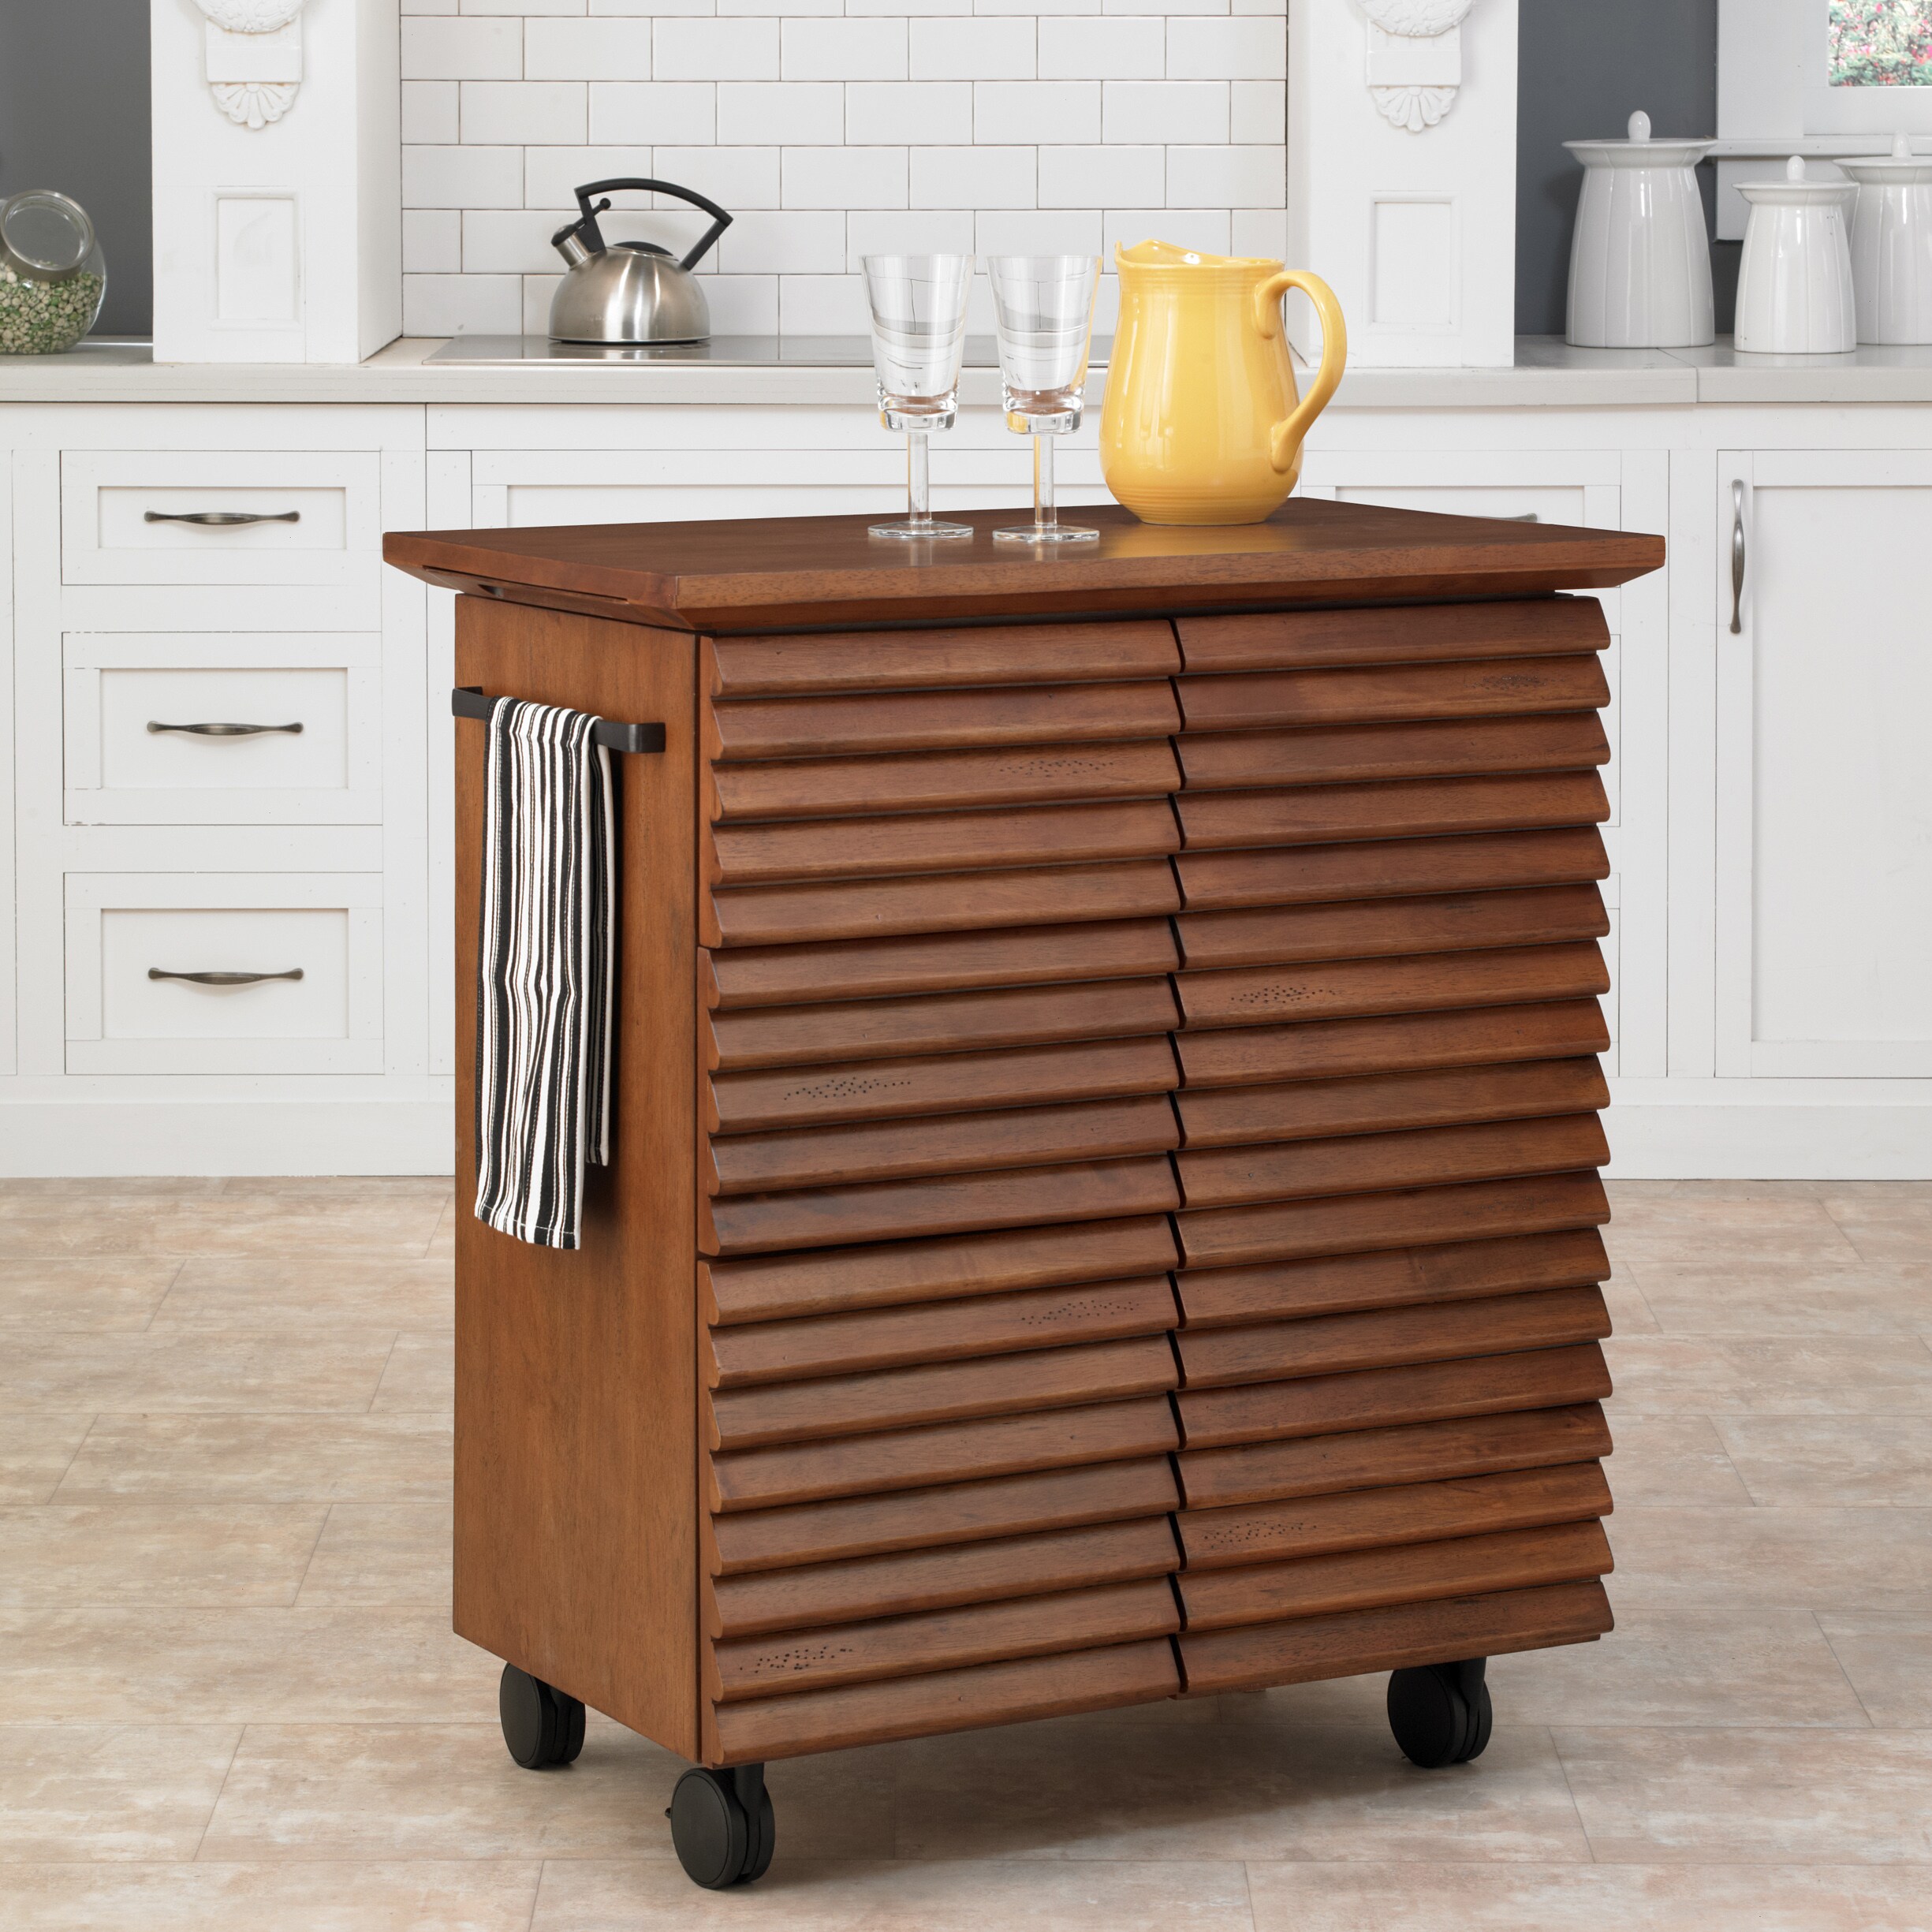 Cascade Louvred Kitchen Cart (ChestnutMaterials Hardwood solids and veneersFinish Warm oak Dimensions 36.25 inches high x 32 inches wide x 20.5 inches deepNumber of shelves One (1) Number of drawers/compartments Three (3) Model 5454 95Assembly requi